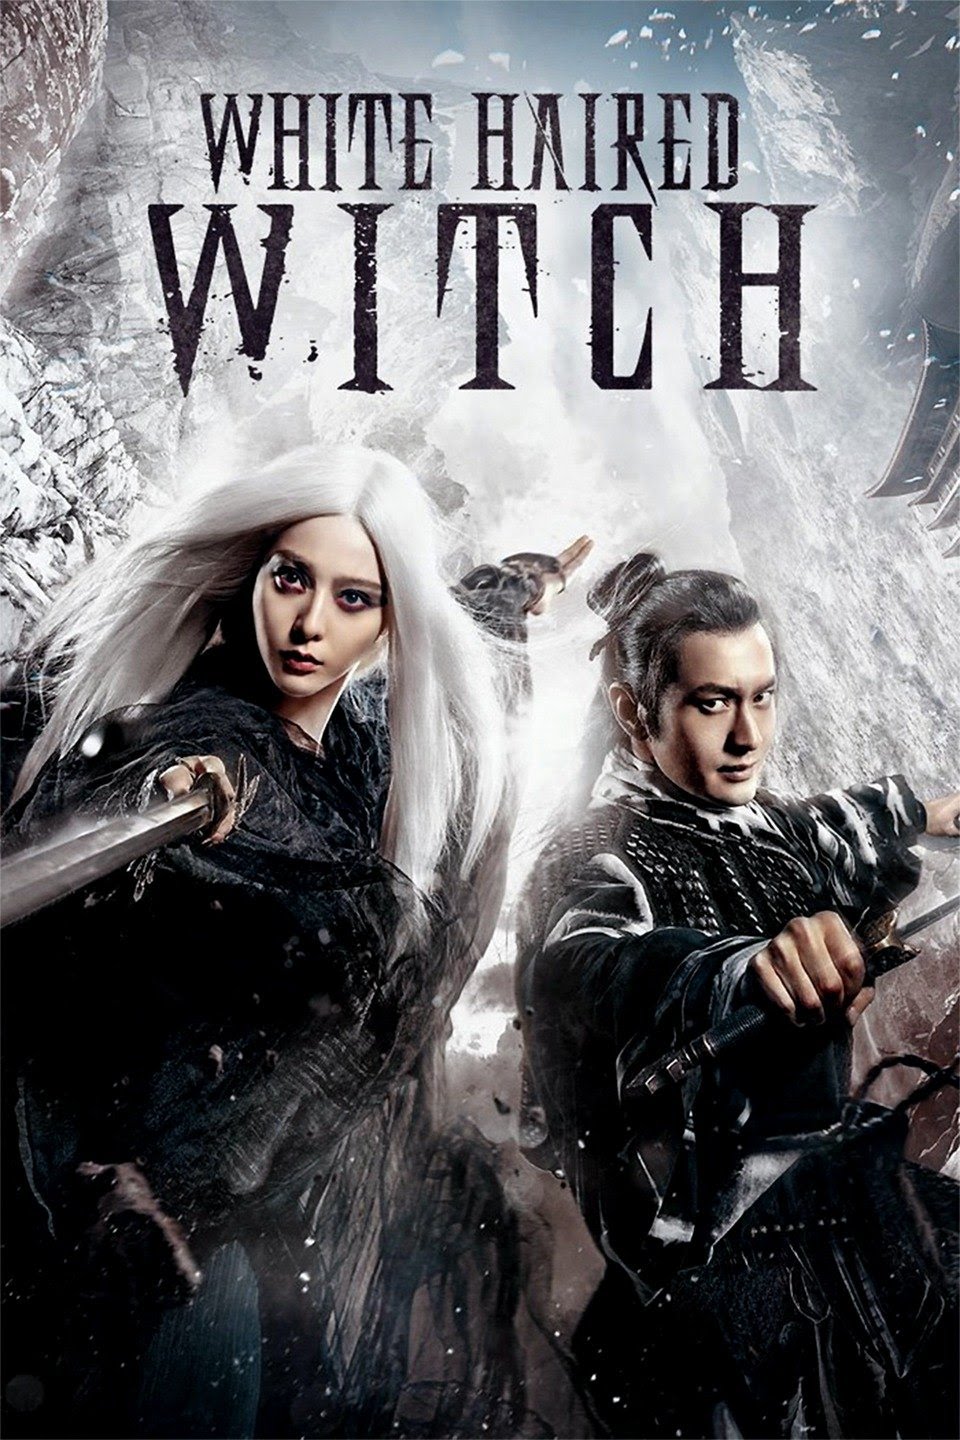 The White Haired Witch of Lunar Kingdom 2014 3D Hindi ORG Dual Audio 1080p BluRay ESub 1.71GB Download